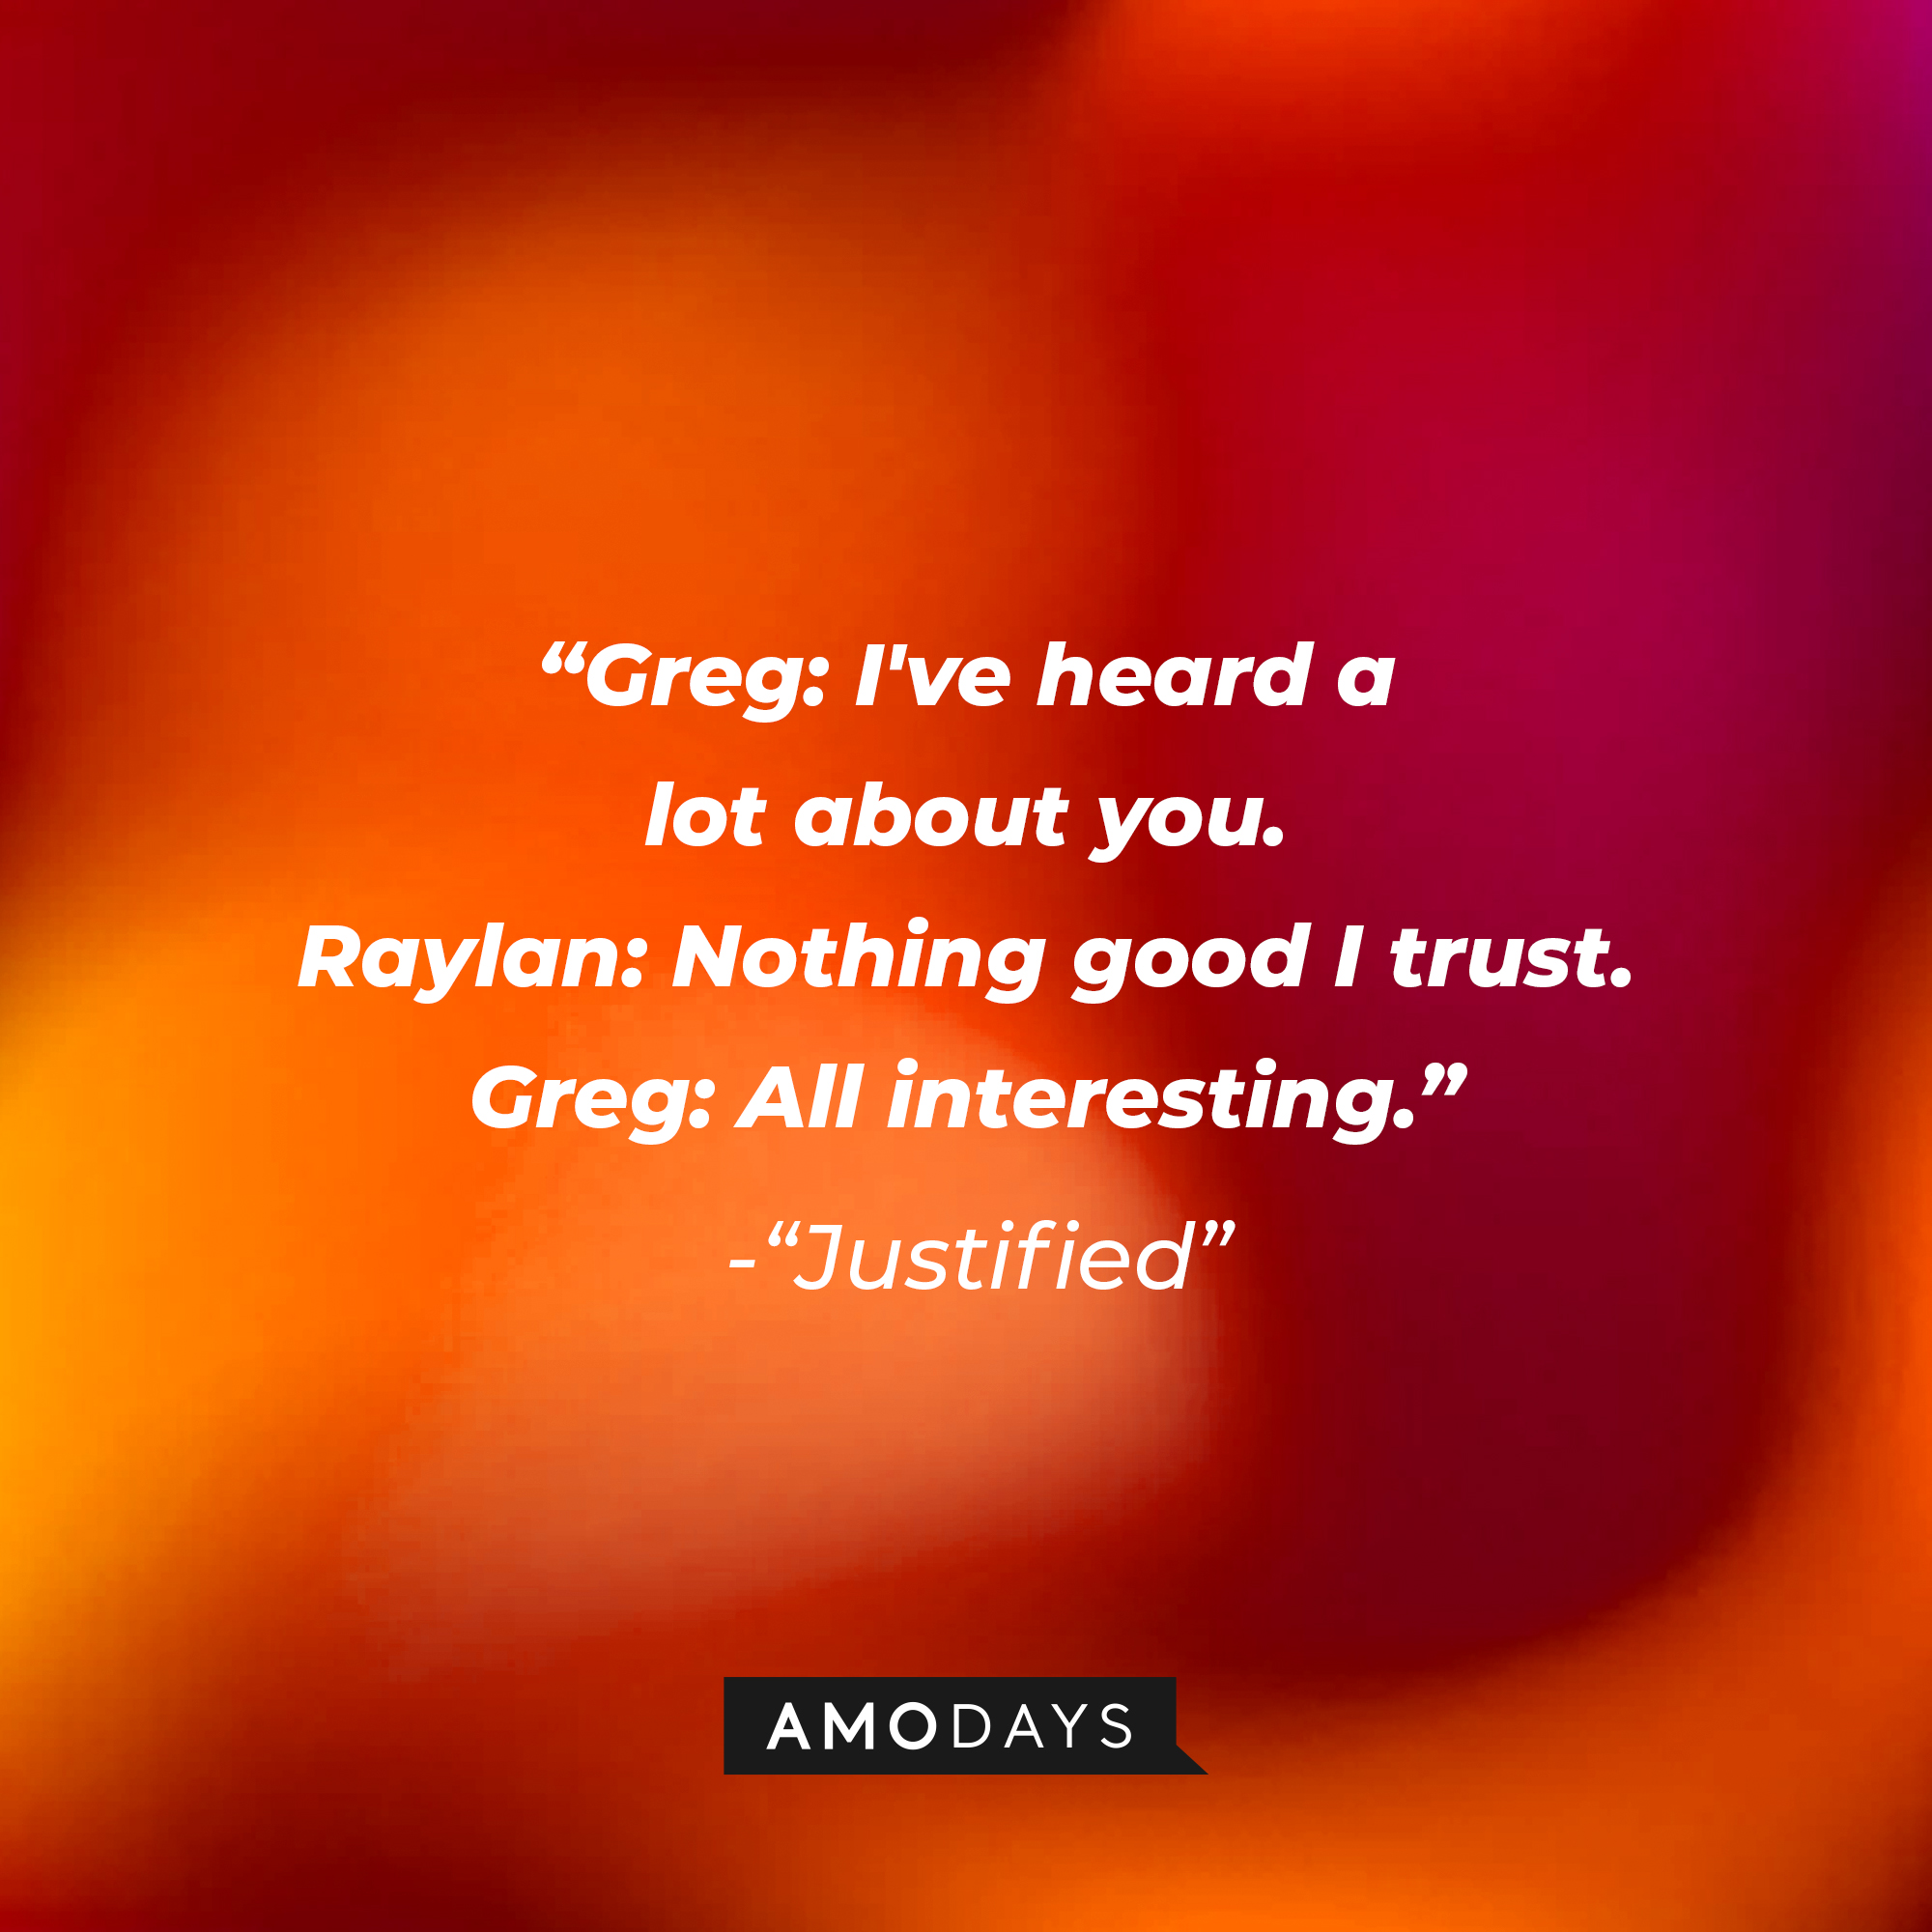 Quote from “Justified”: “Greg: I've heard a lot about you. Raylan: Nothing good I trust. Greg: All interesting.” | Source: AmoDays